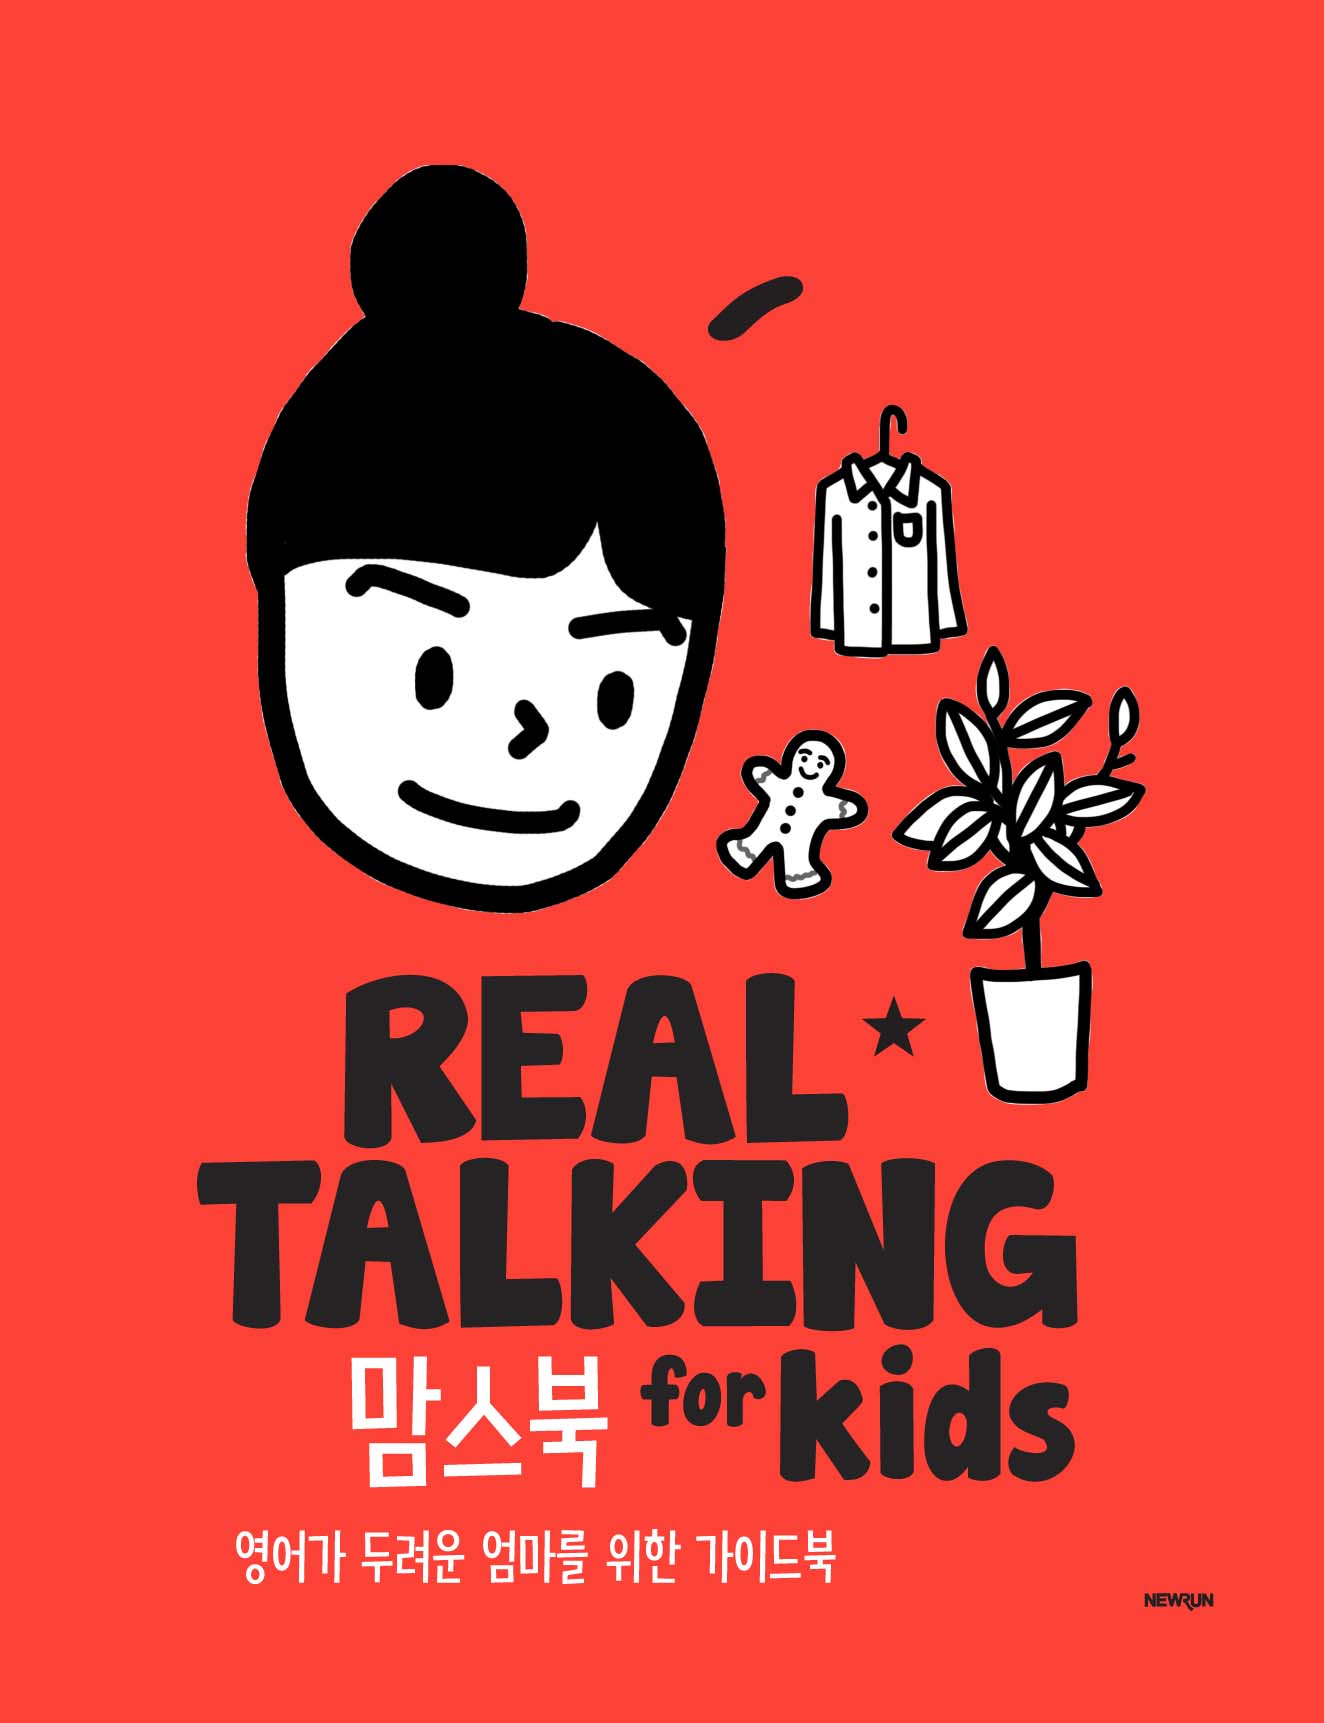 Real Talking for kids